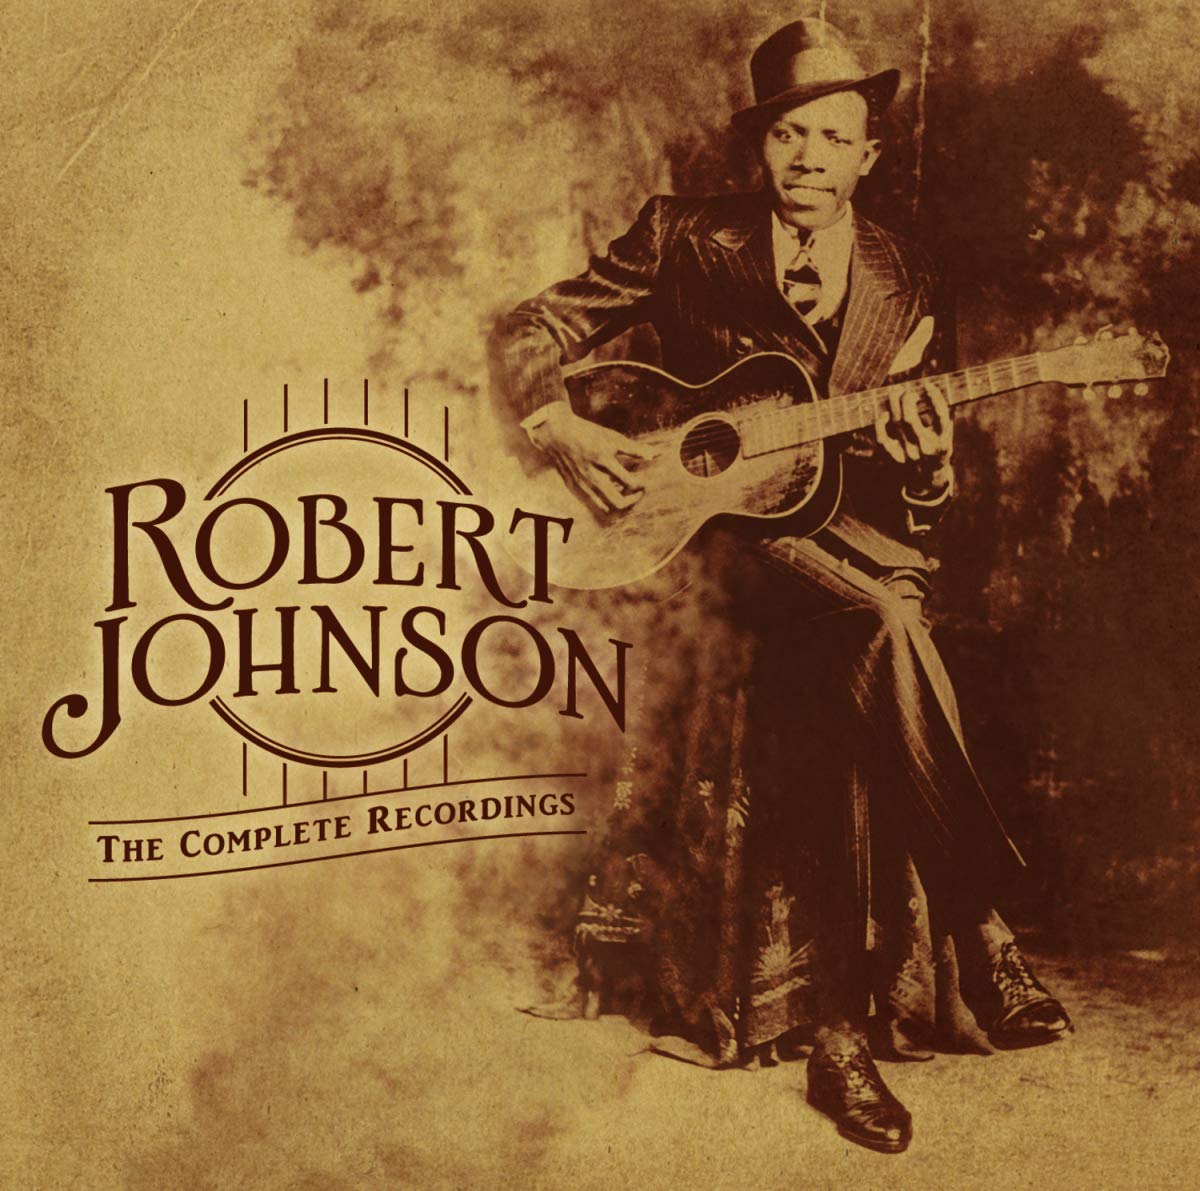 The Eternal King of Delta Blues: A Tribute to Robert Johnson